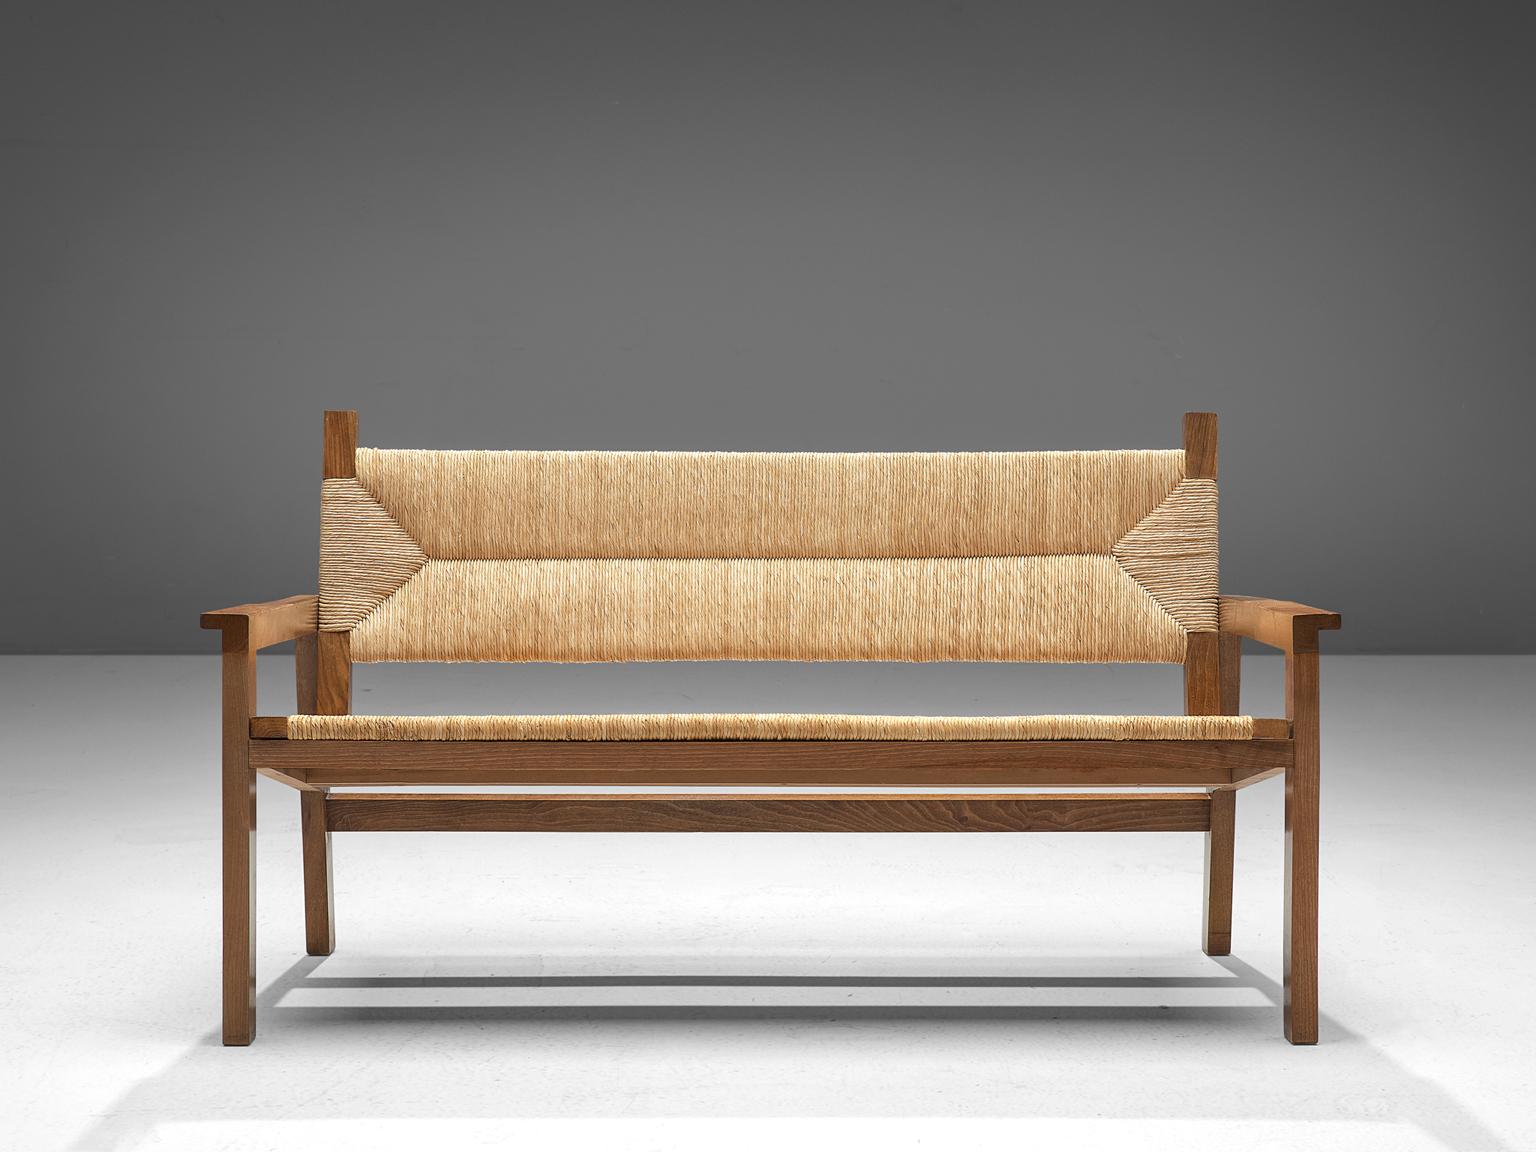 Spanish Refined Bench in Walnut and Cane, Spain